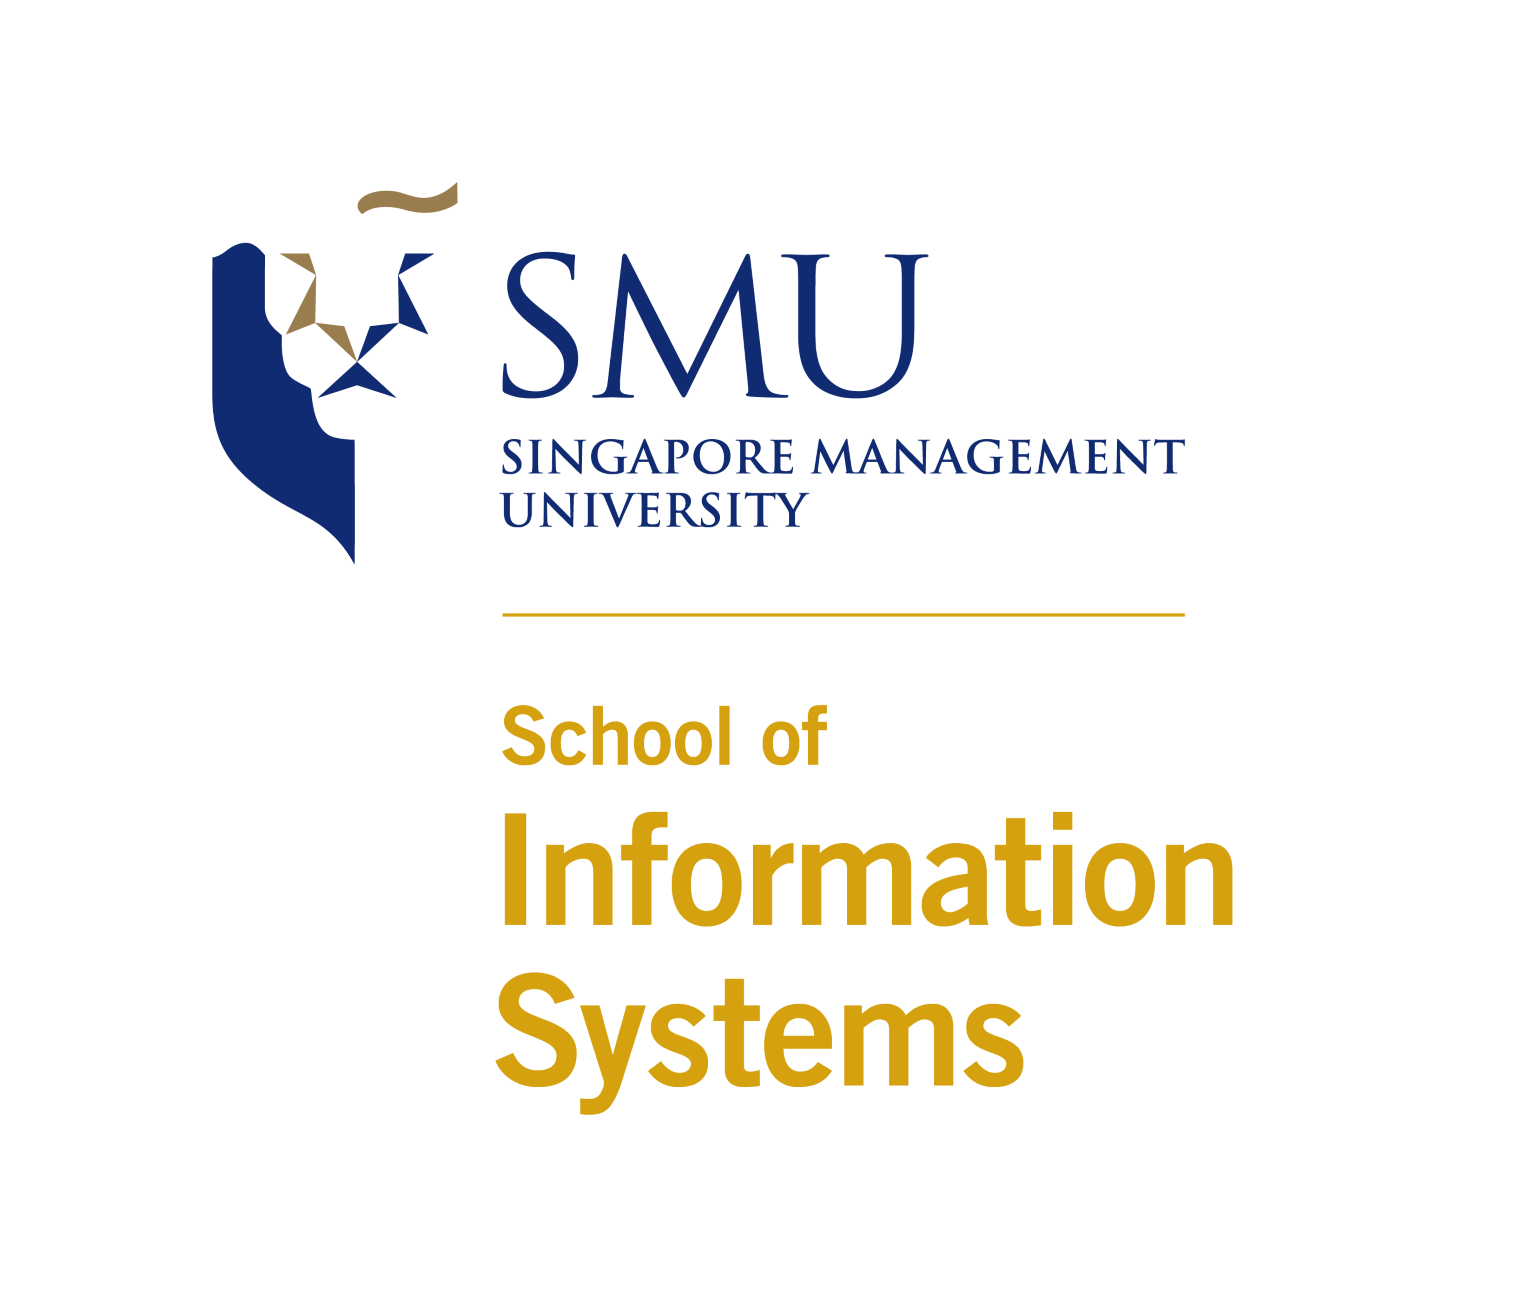 School of Information Systems Most Popular Papers (Oct 2018-Jan 2019)